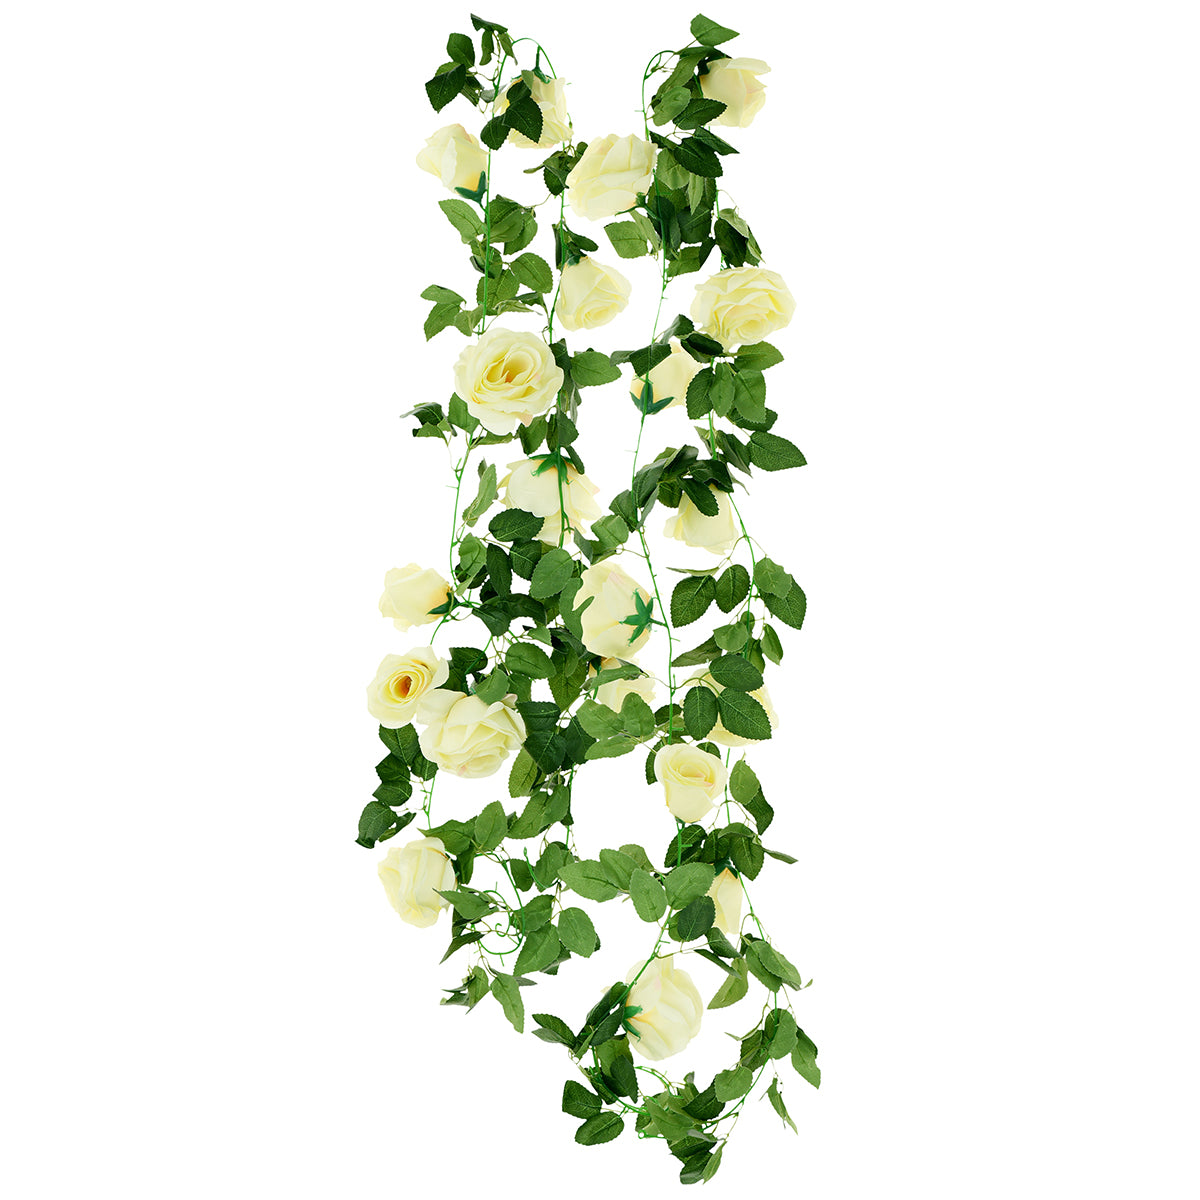 2 Bunches 14.4 ft of Cream White Artificial Silk Rose Vines